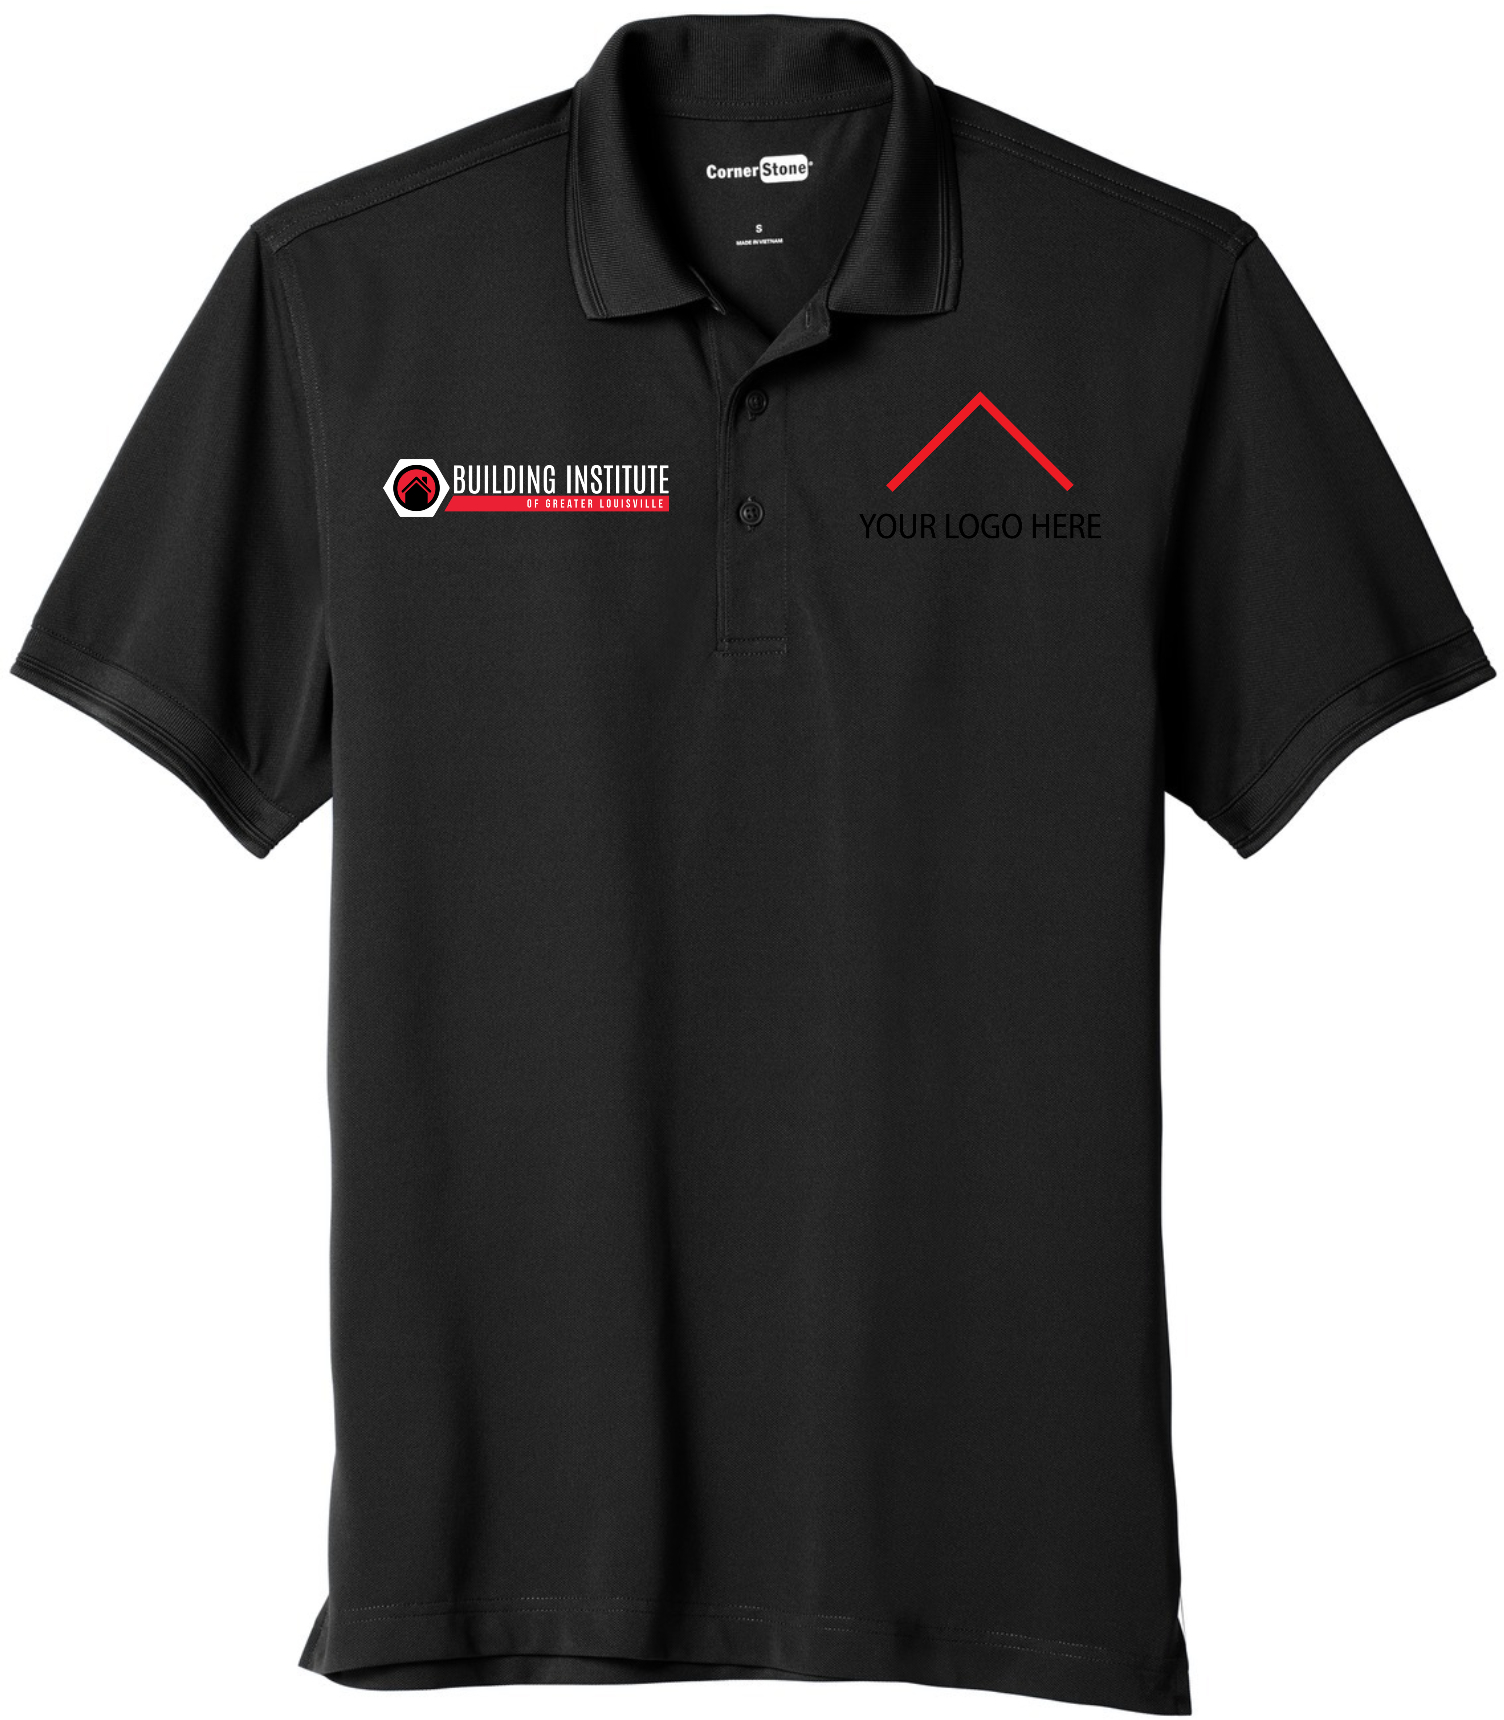 Building Institute - CornerStone ® Industrial Snag-Proof Pique Polo - CS4020 (White Logo) (Add Your Own)